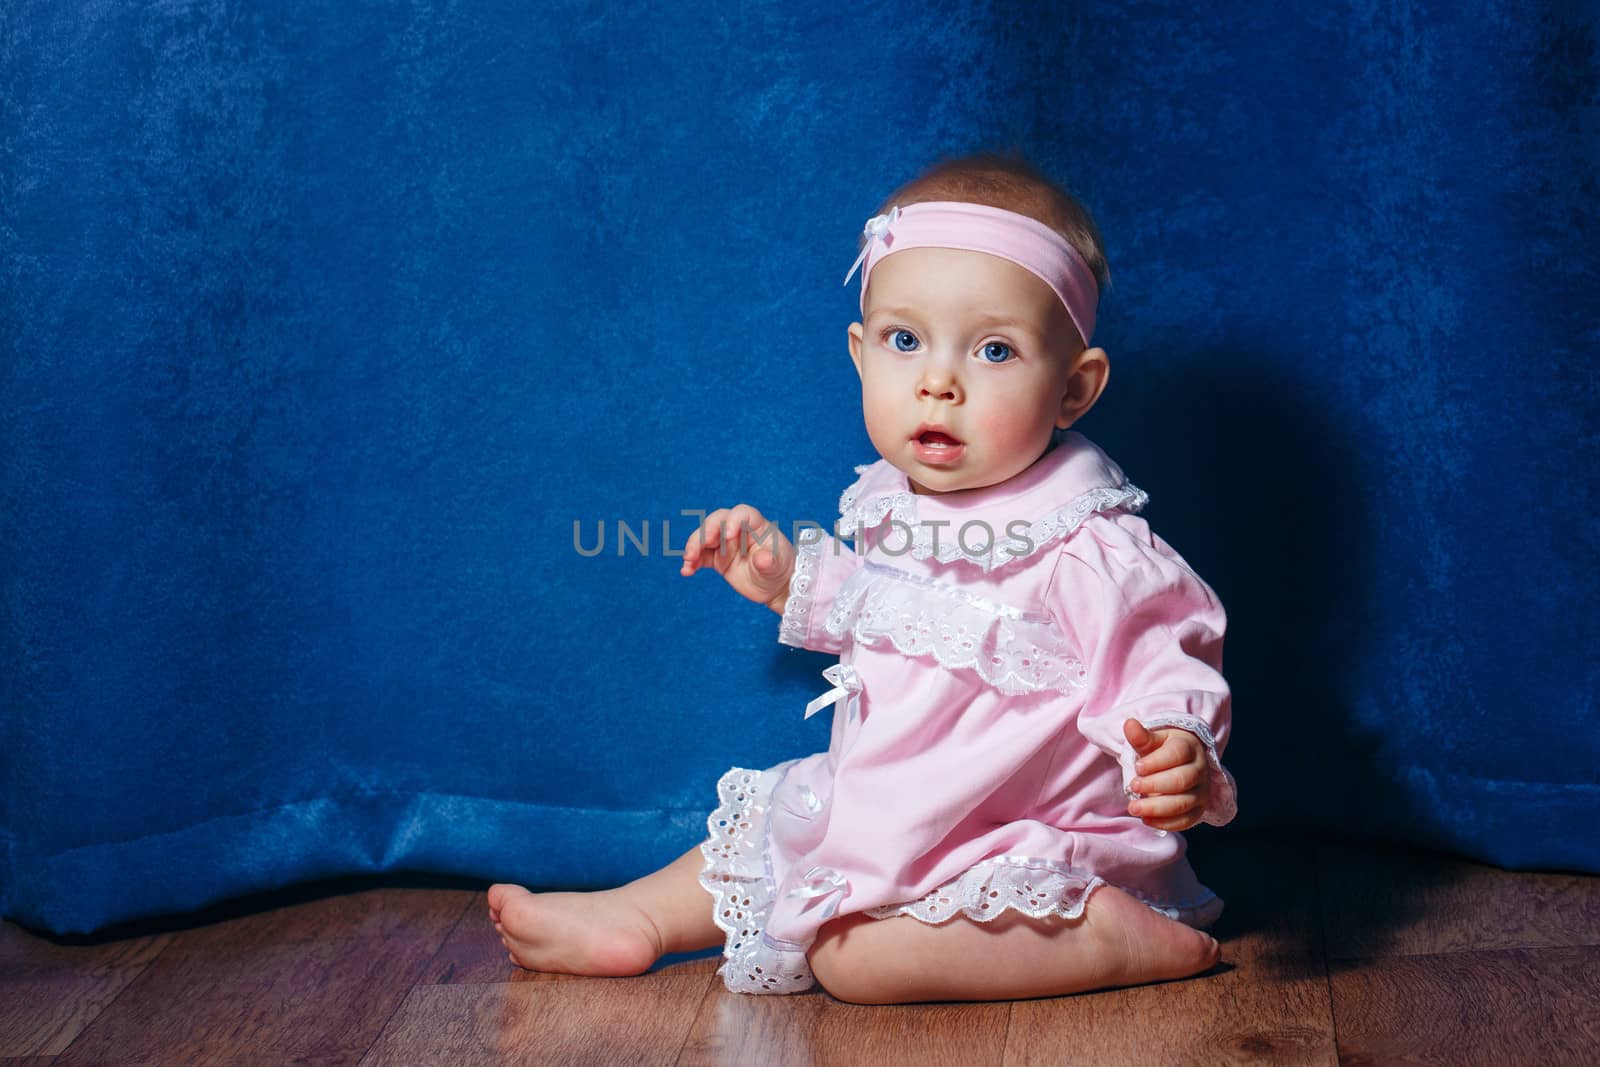 Cute little girl in a pink dress sitting on the floor barefoot